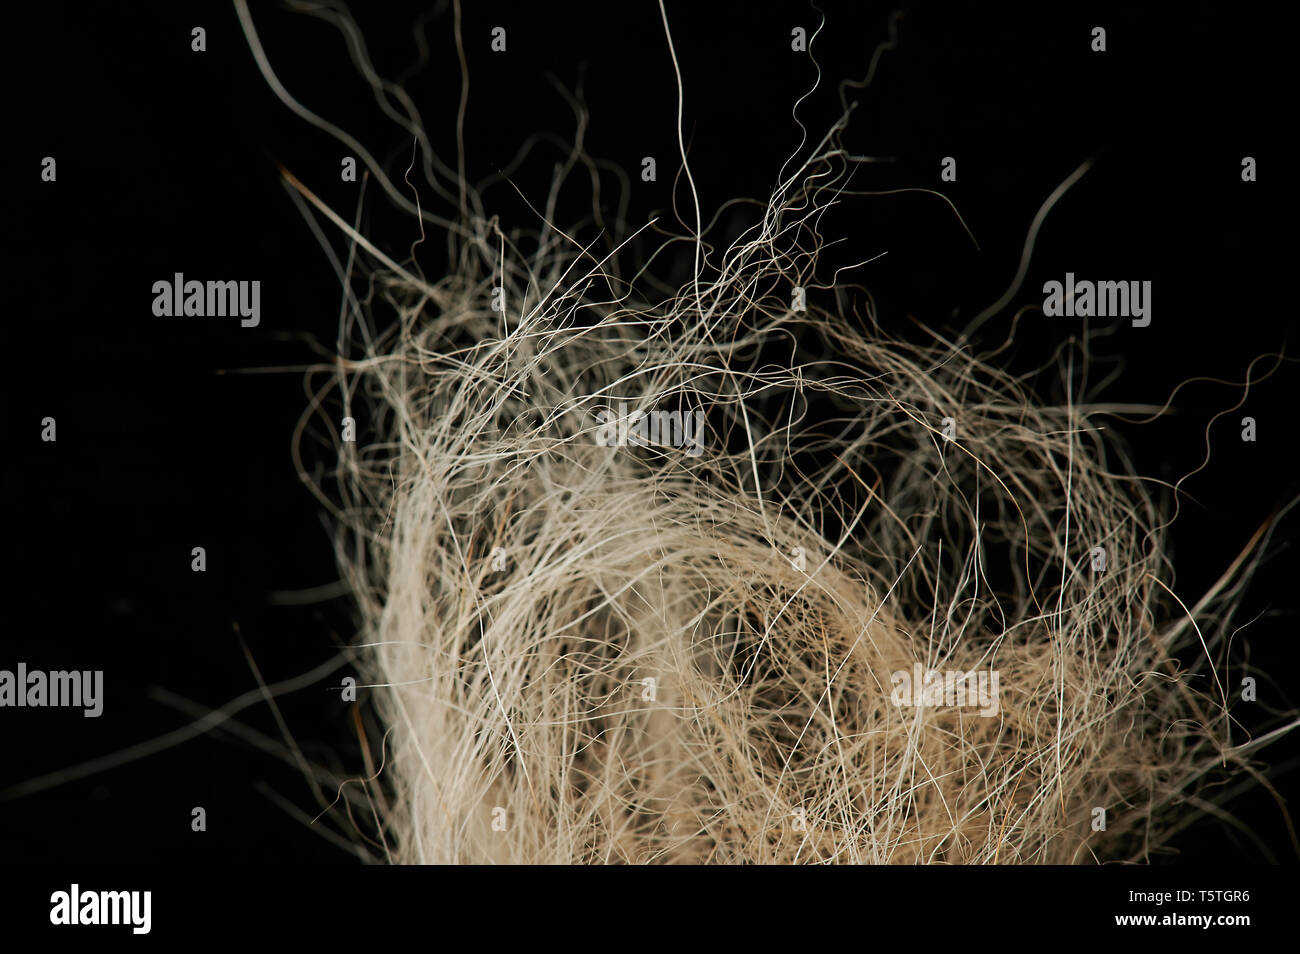 Messy animal hair isolated on black background Stock Photo